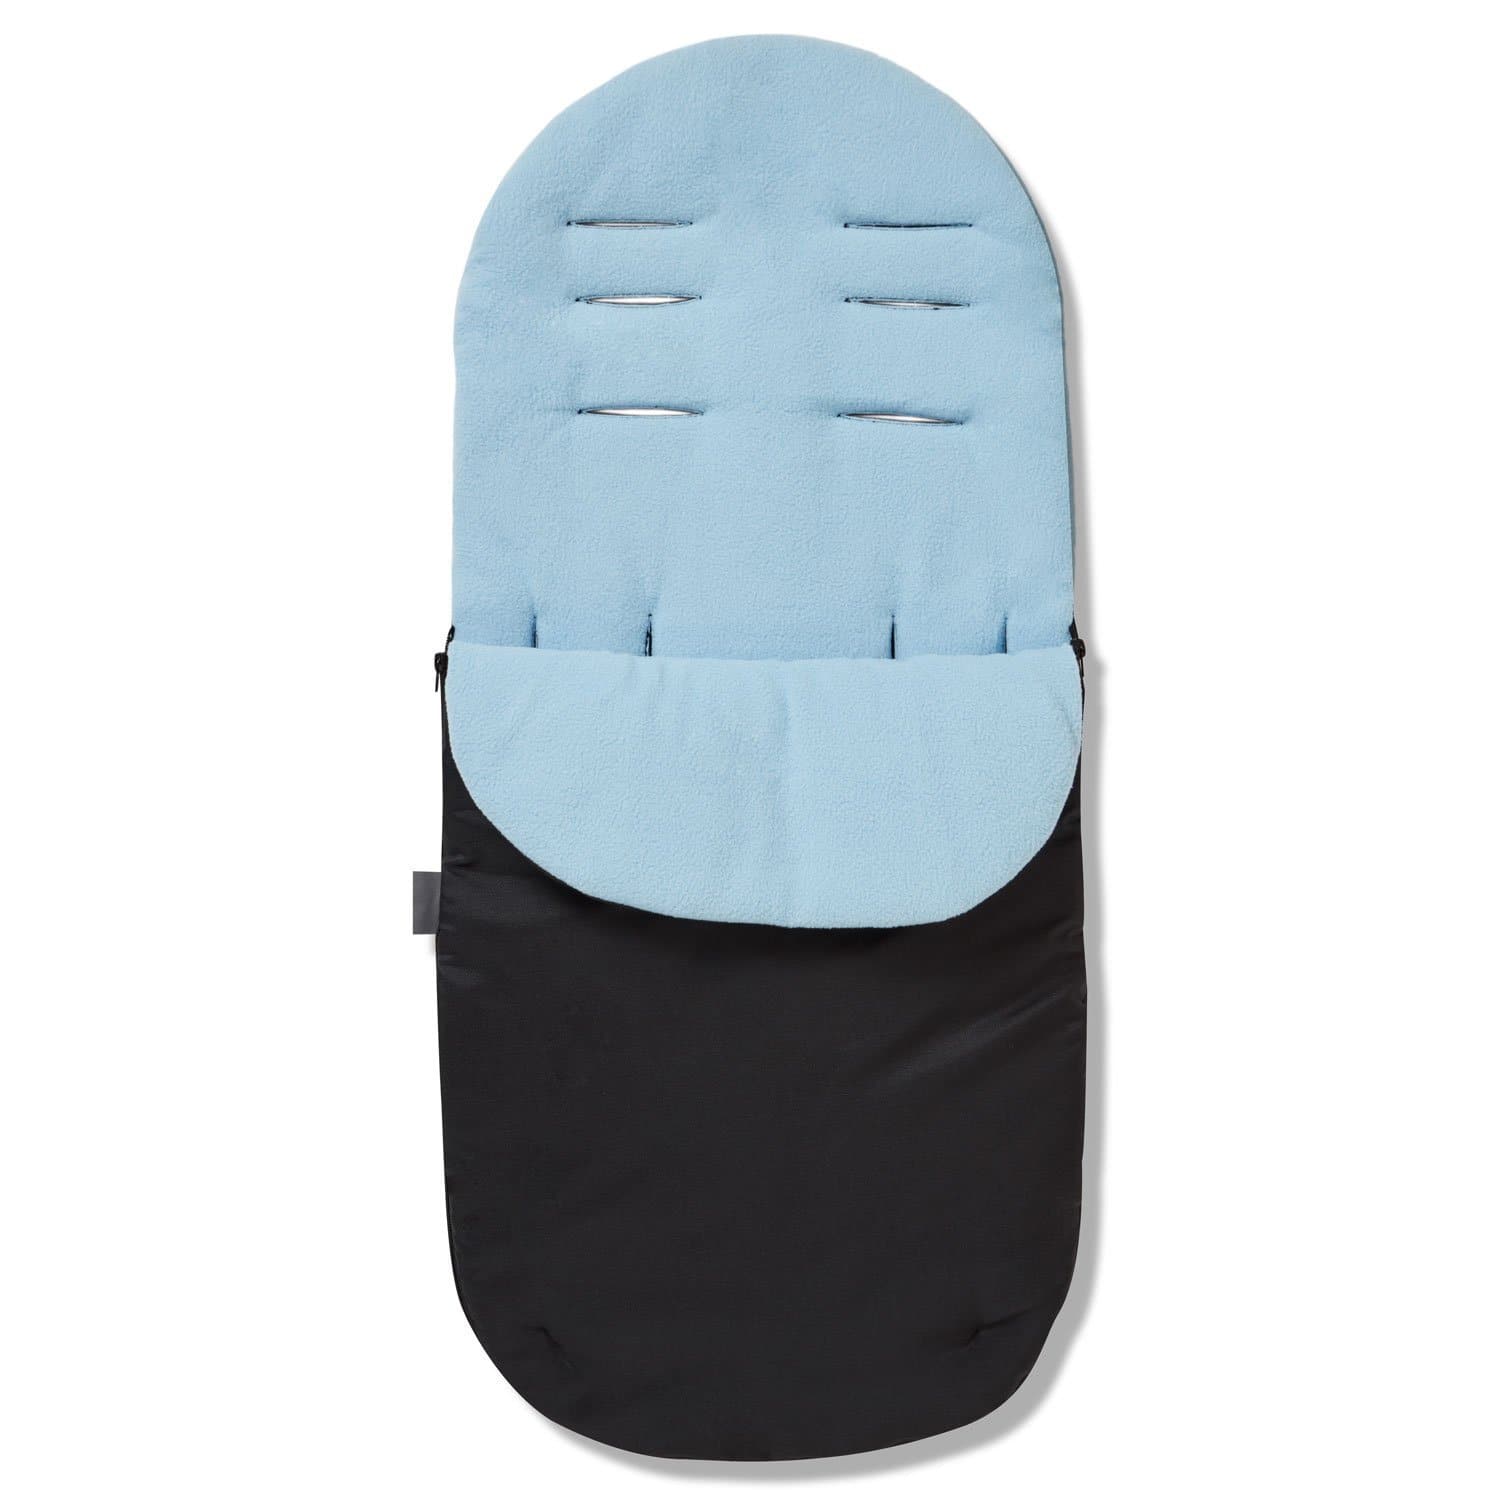 Footmuff / Cosy Toes Compatible with Joolz - Light Blue / Fits All Models | For Your Little One